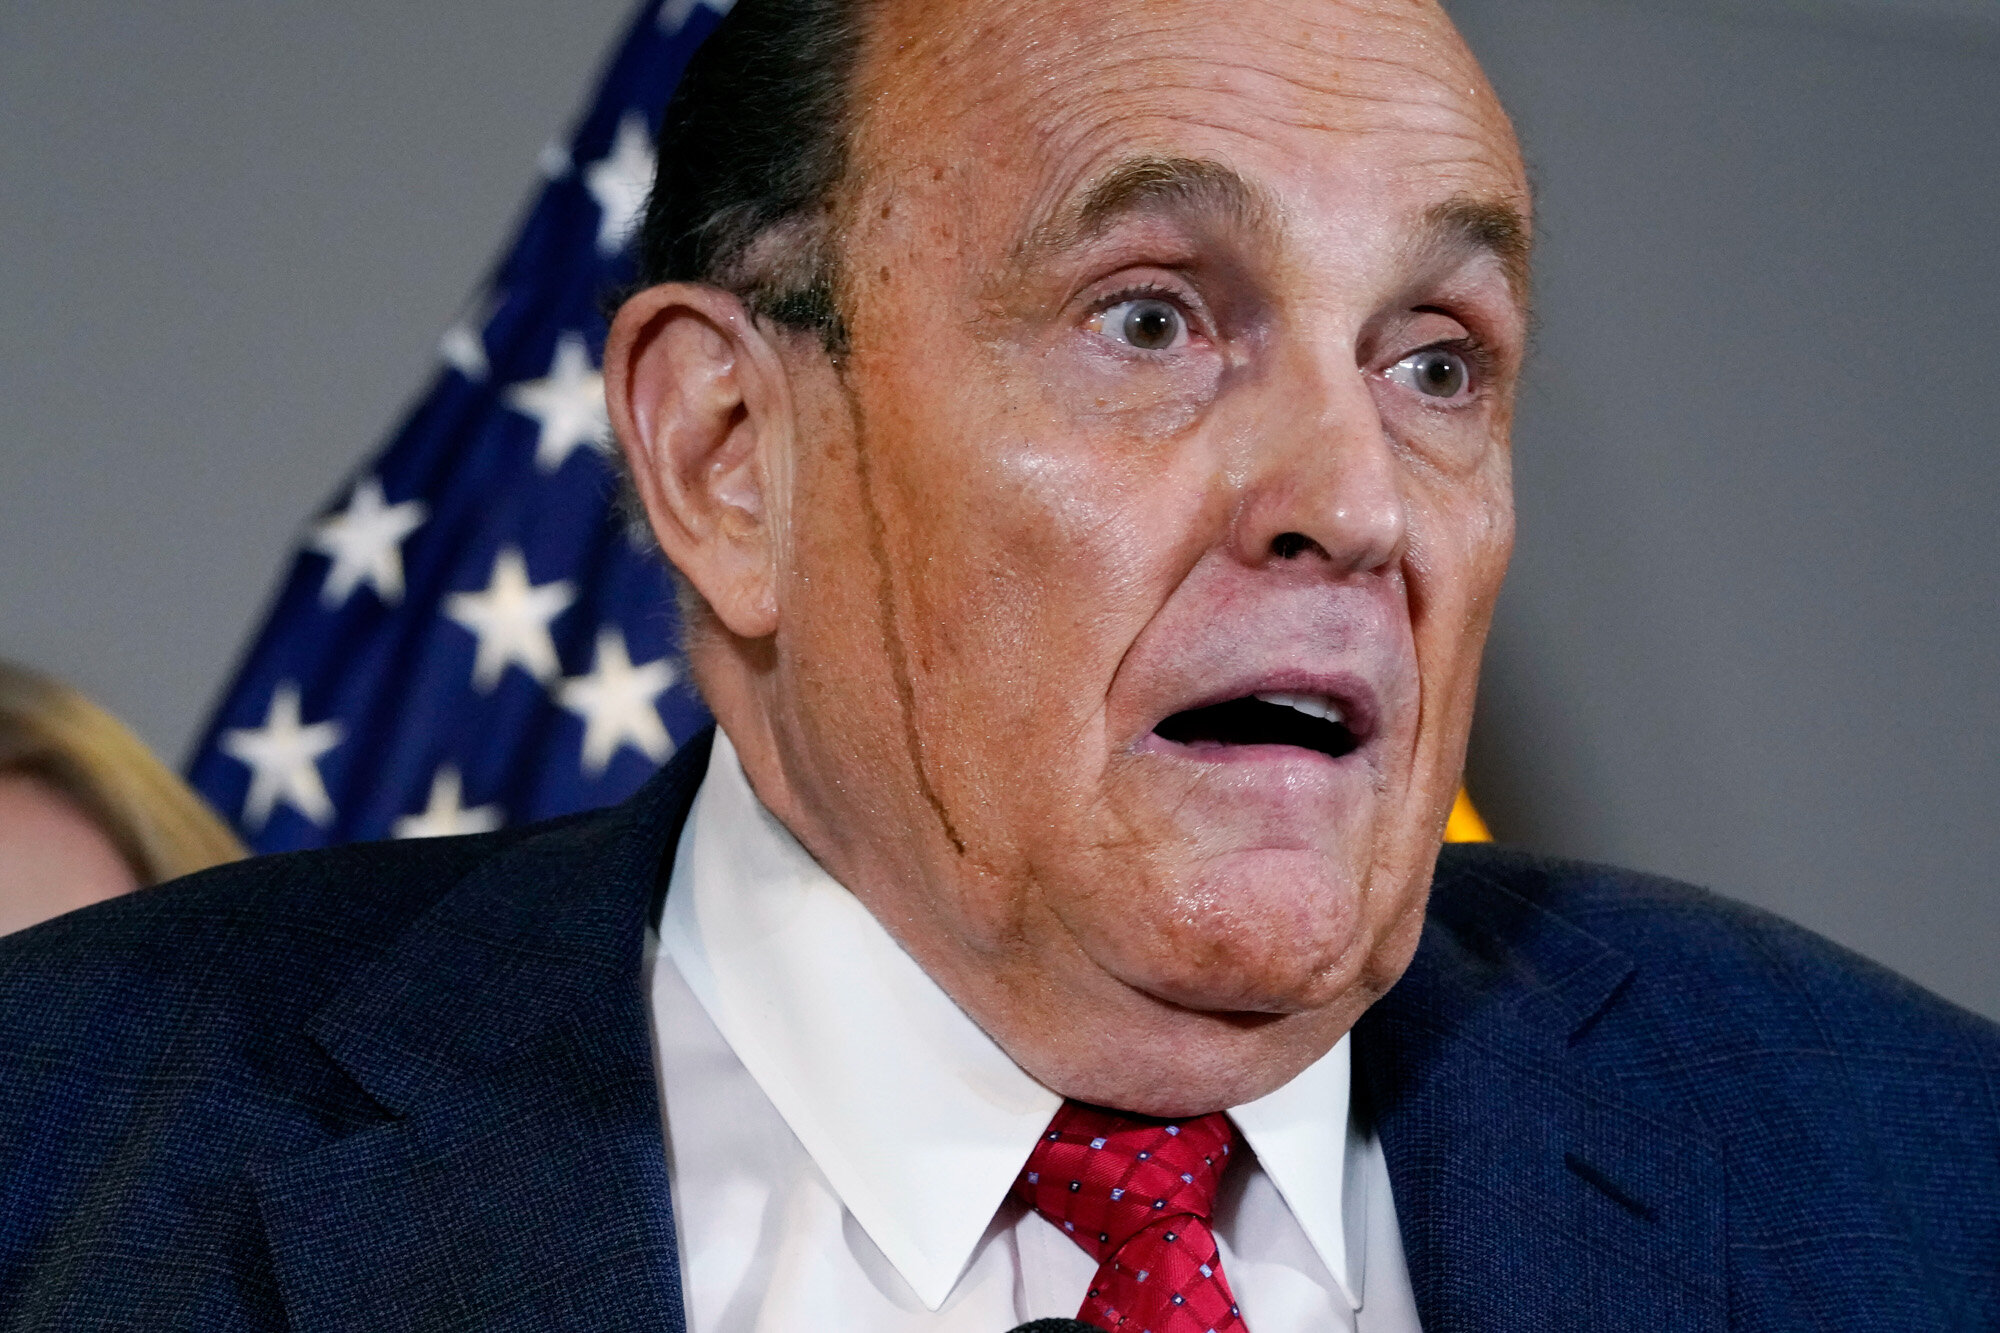  Former Mayor of New York Rudy Giuliani, a lawyer for President Donald Trump, speaks during a news conference at the Republican National Committee headquarters in Washington on Nov. 19, 2020. (AP Photo/Jacquelyn Martin) 